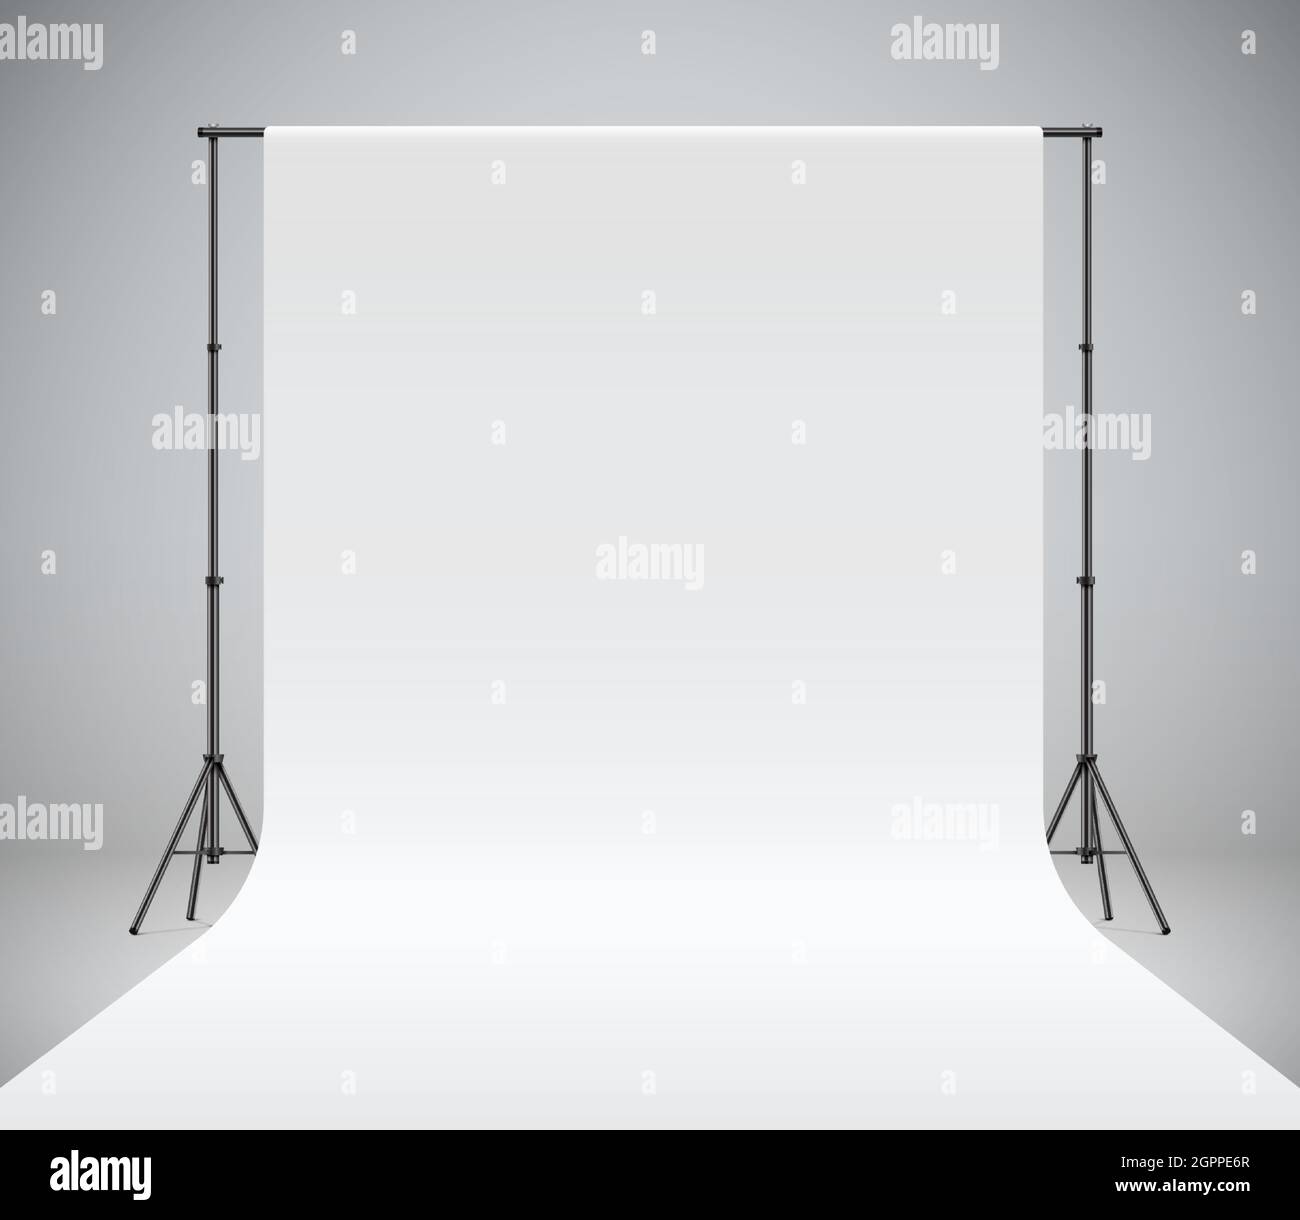 White photo studio backdrop, realistic vector illustration. Photography polyester background hanging on black stands. Professional photo shooting setup standing on a grey background. Stock Vector